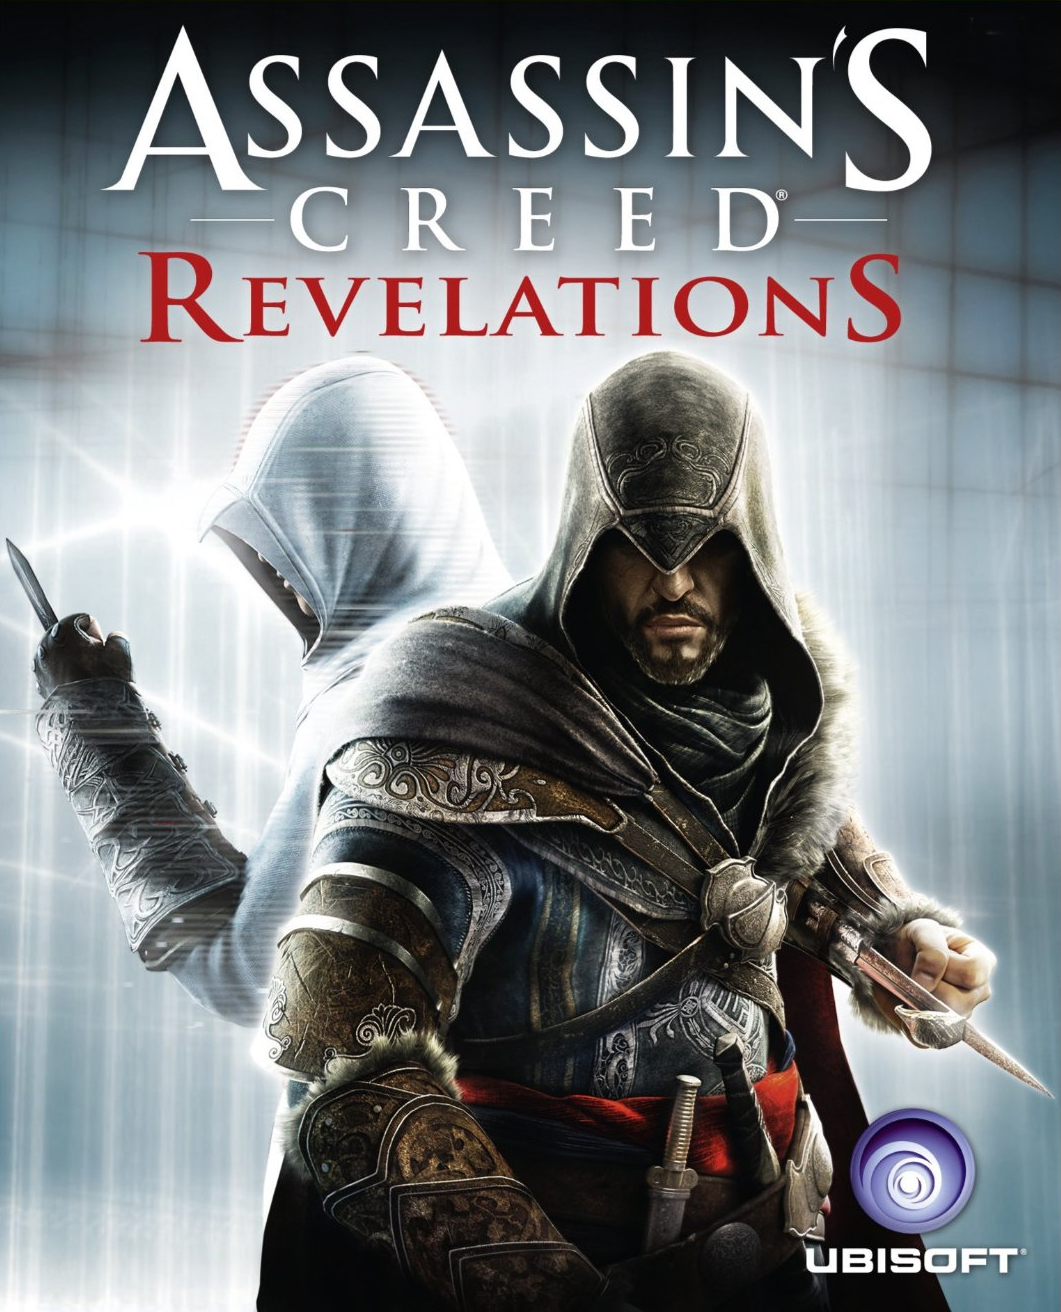 Assassins Creed (Highly compressed) | 16 mb